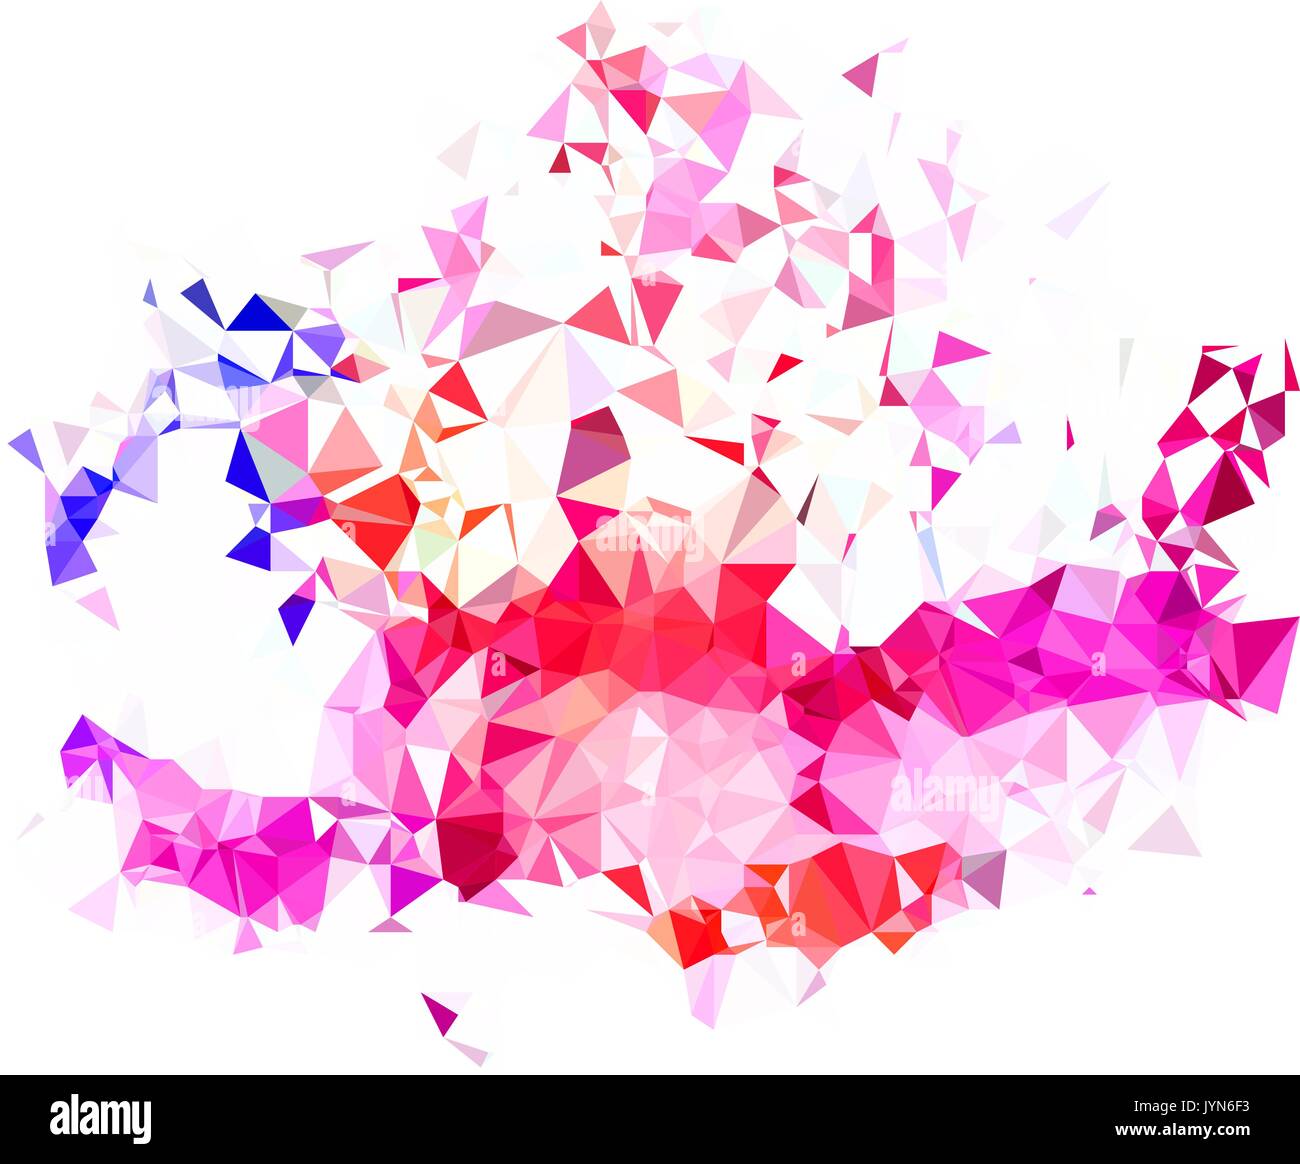 Abstract color splash shape. Triangulated geometric low poly background, blue, purple, amethyst and orange shades. Isolated on white. For your design. Stock Vector